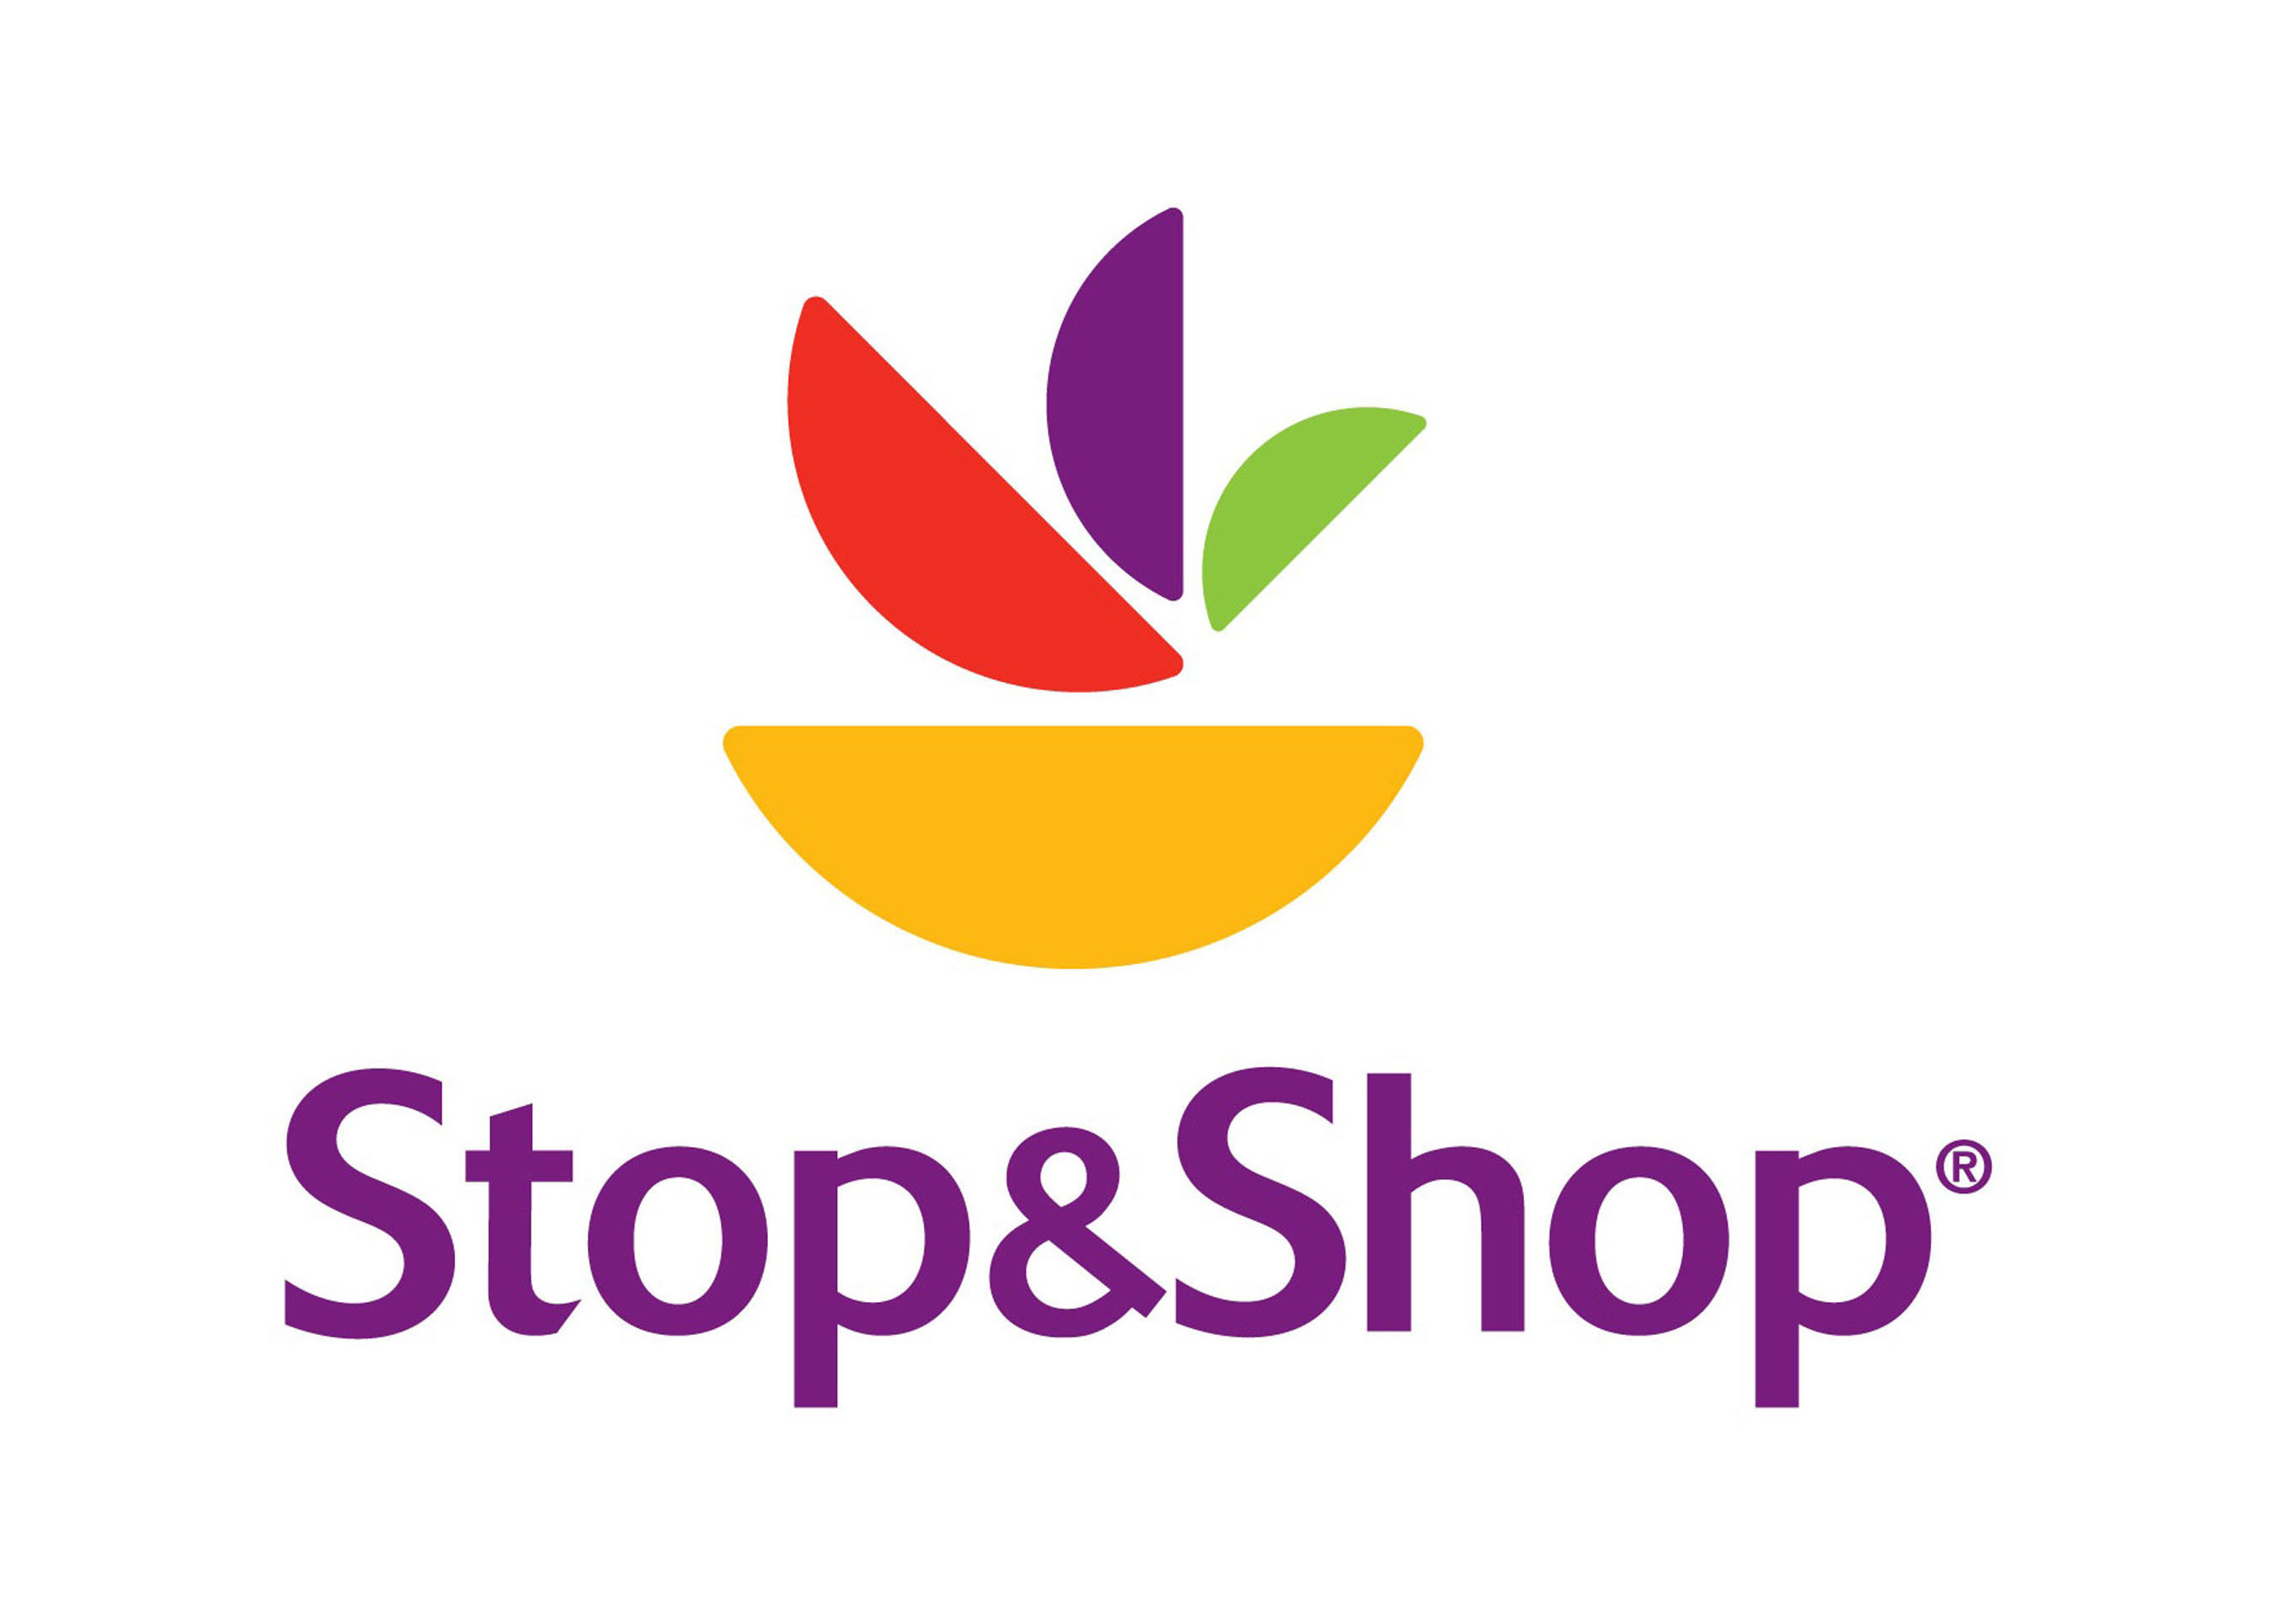 Stop & Shop to Accelerate Omnichannel Growth with Three New Warerooms and at Least 50 Additional Pickup Locations by Year-End